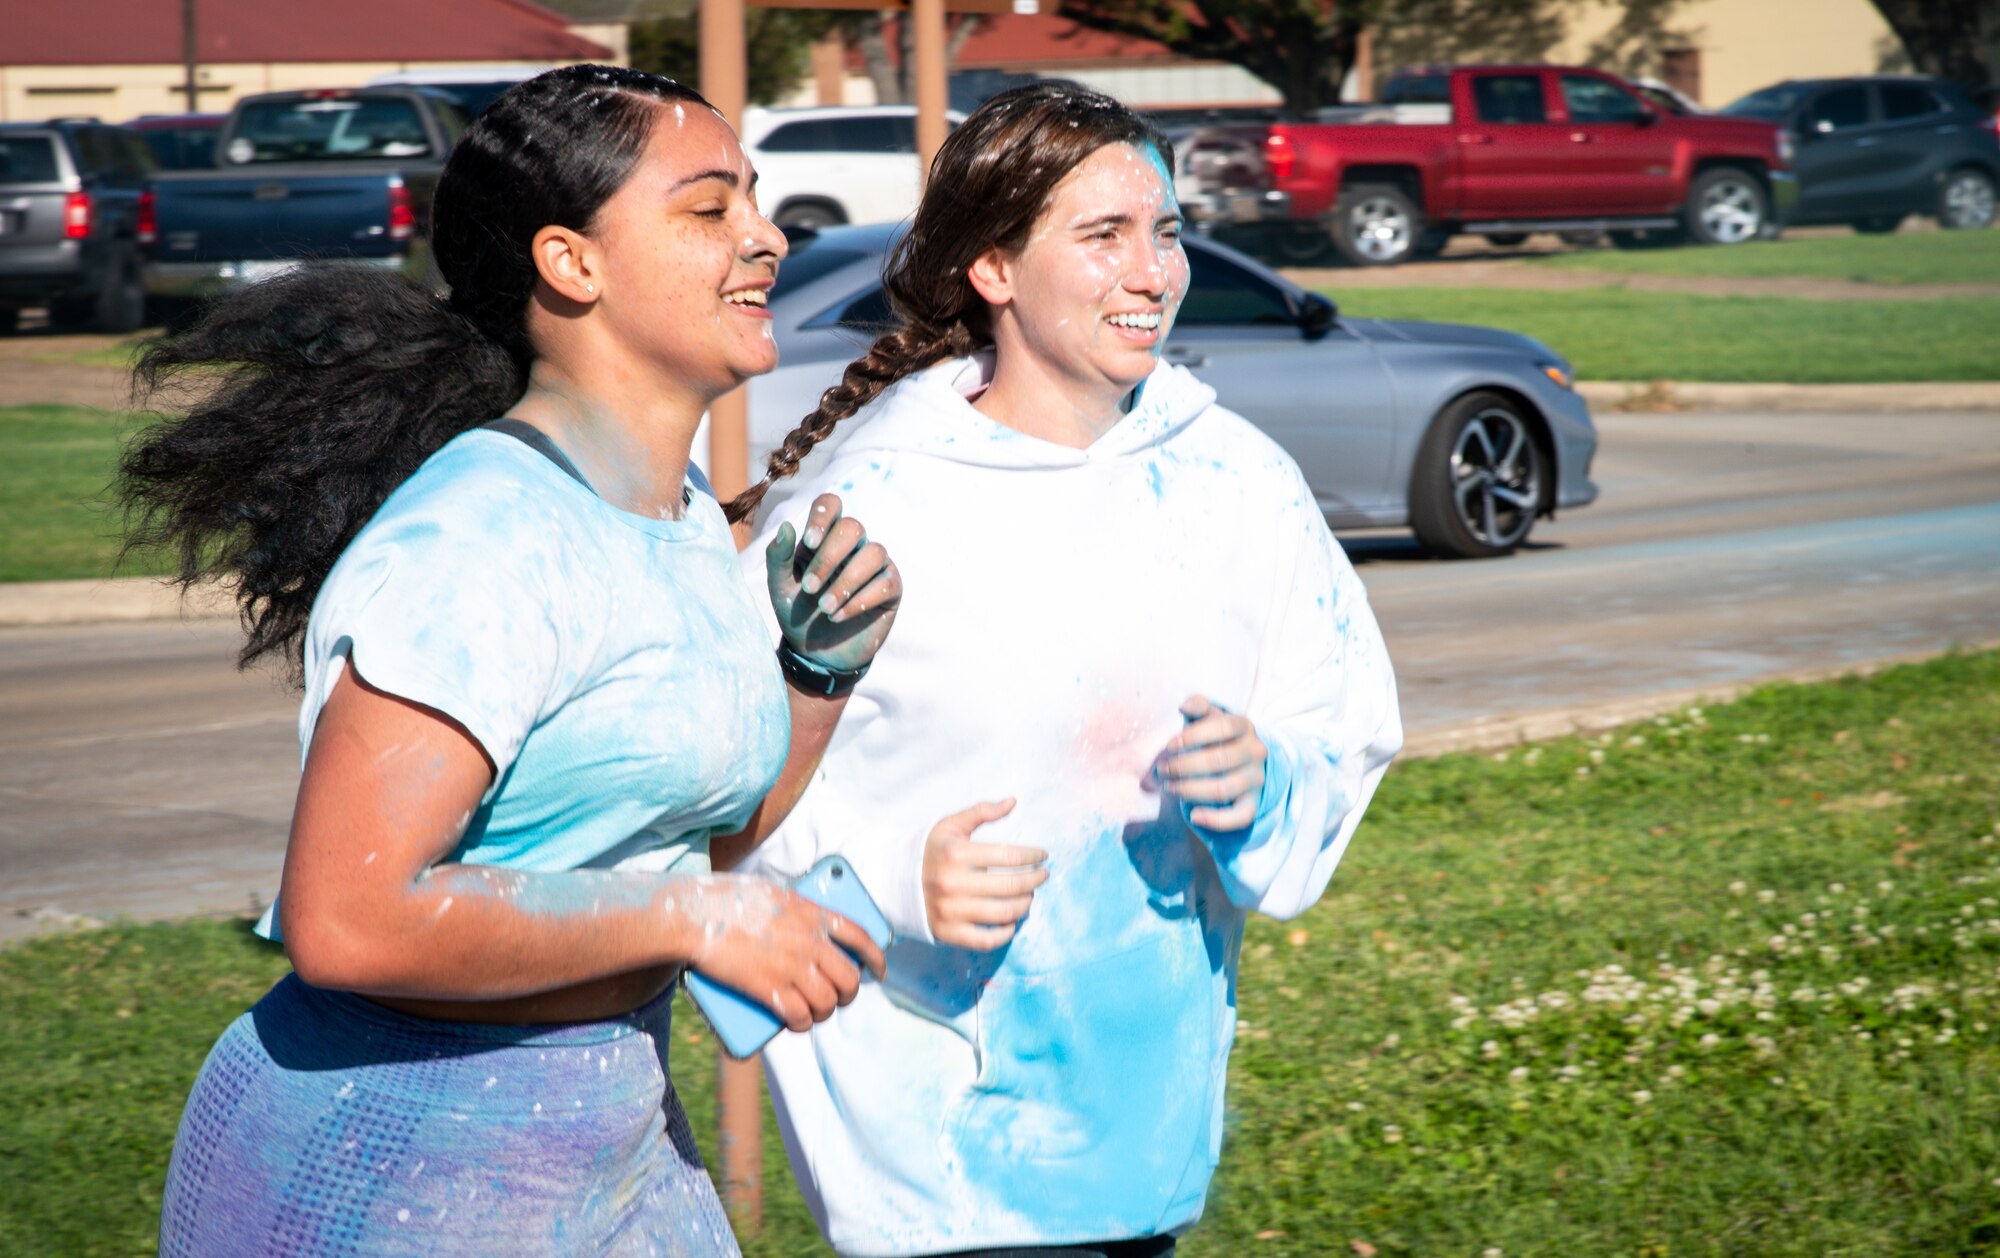 Participants in the Sexual Assault Awareness Month 5K run to the finish line at Barksdale Air Force Base, Louisiana, April 2, 2021.